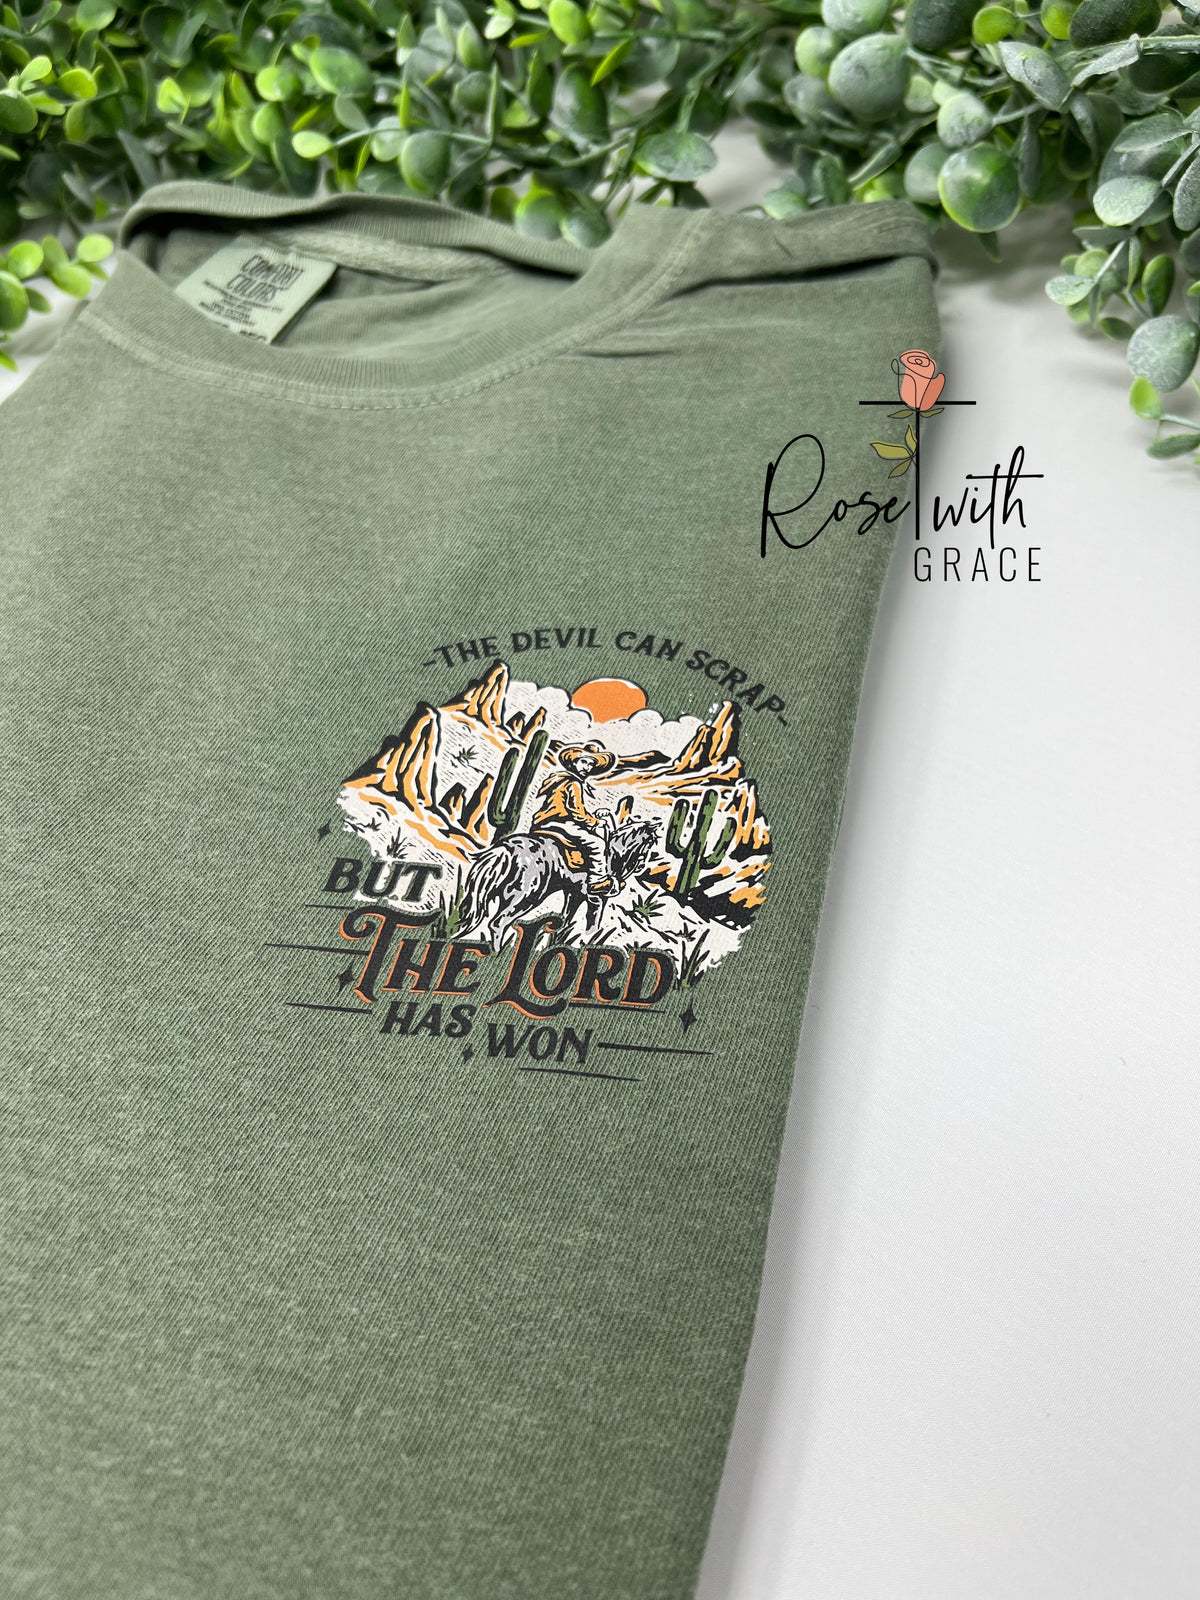 The Lord Has Won - Comfort Colors T-Shirt (Pocket & Back Design) Rose with Grace LLC